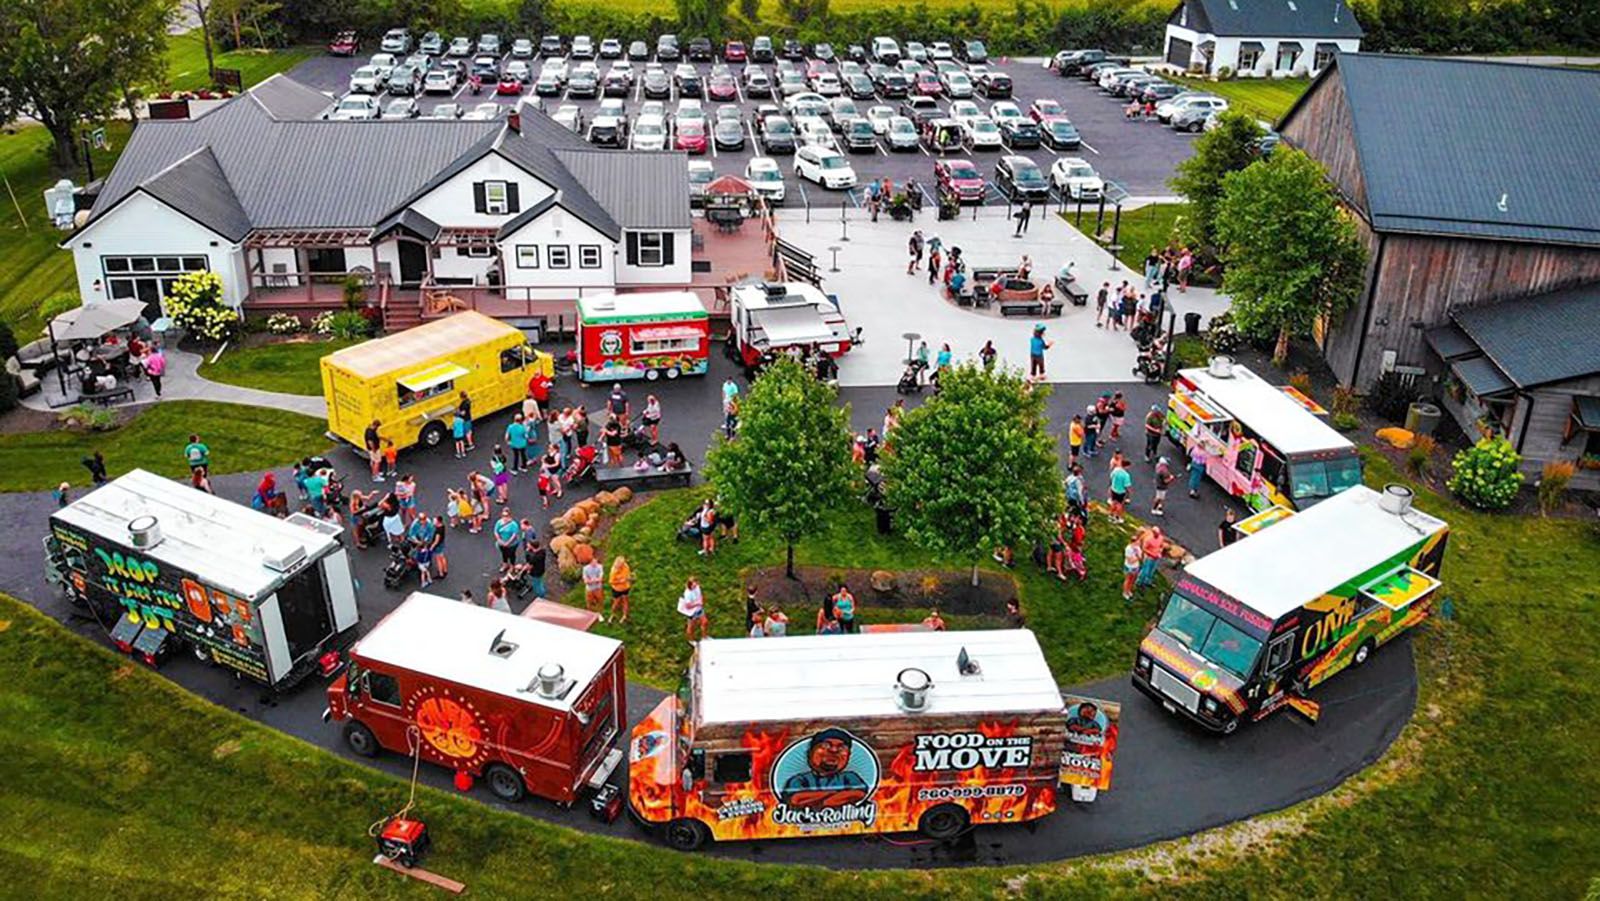 Union 12 will have its first Food Truck Night of the year on May 17.